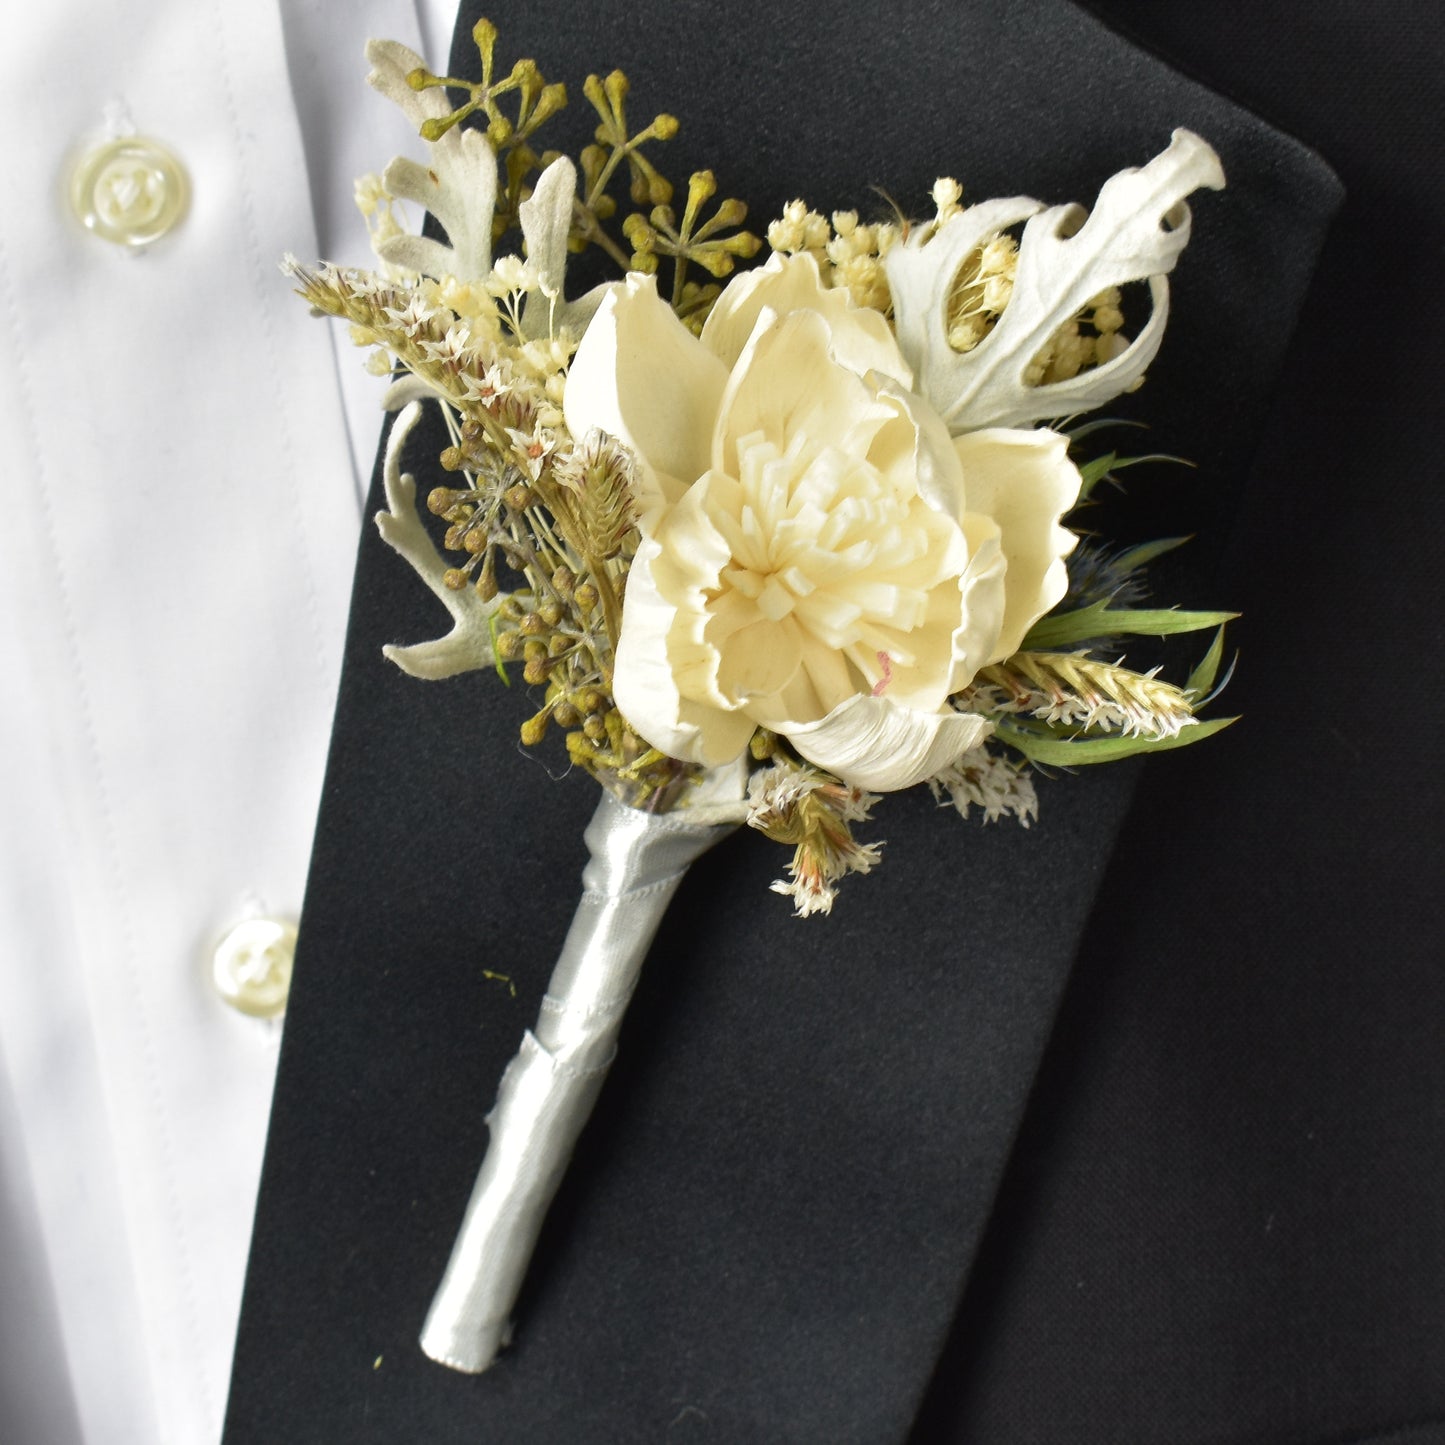 White and Gray Sola Flower Boutonniere// Wood Flower Boutonniere//"Something Blue" Sola Flower Boutonniere